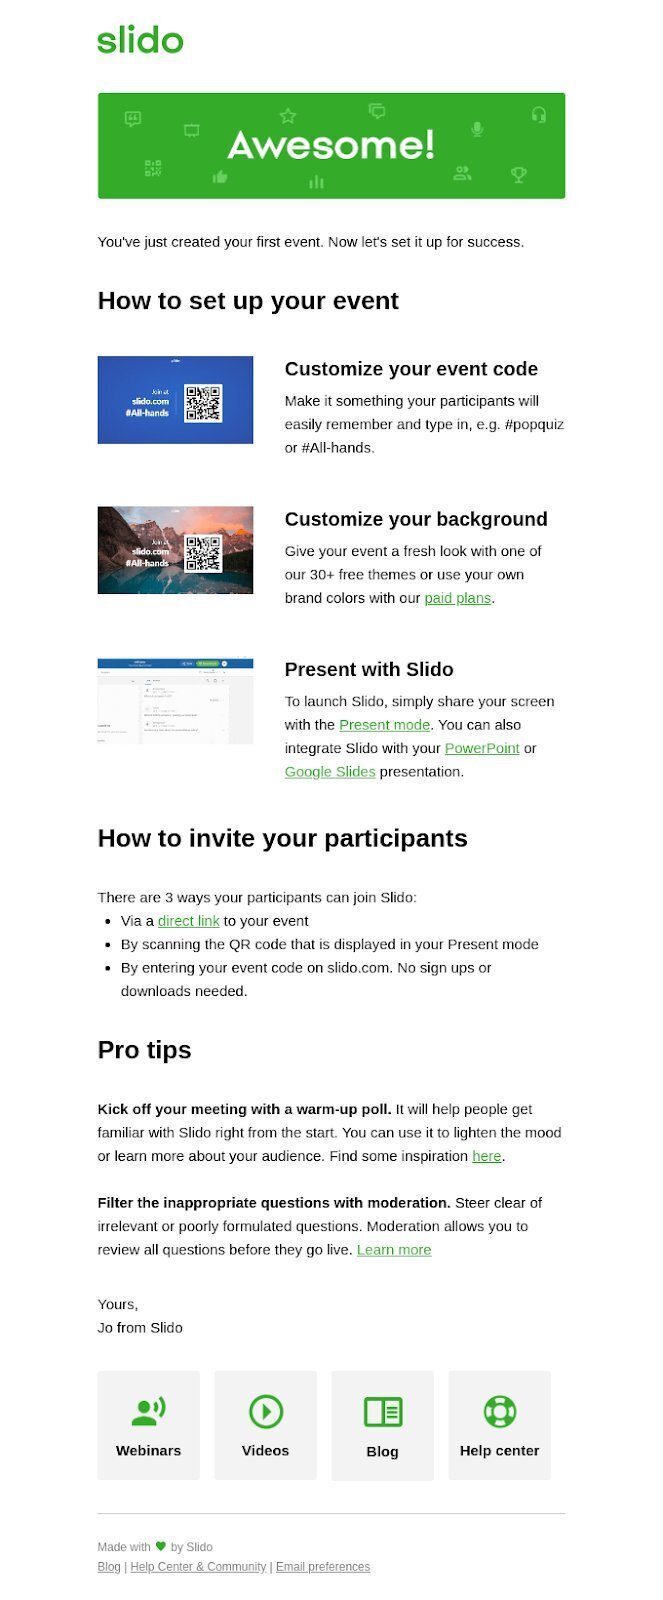 Example of Slido's pro tips email